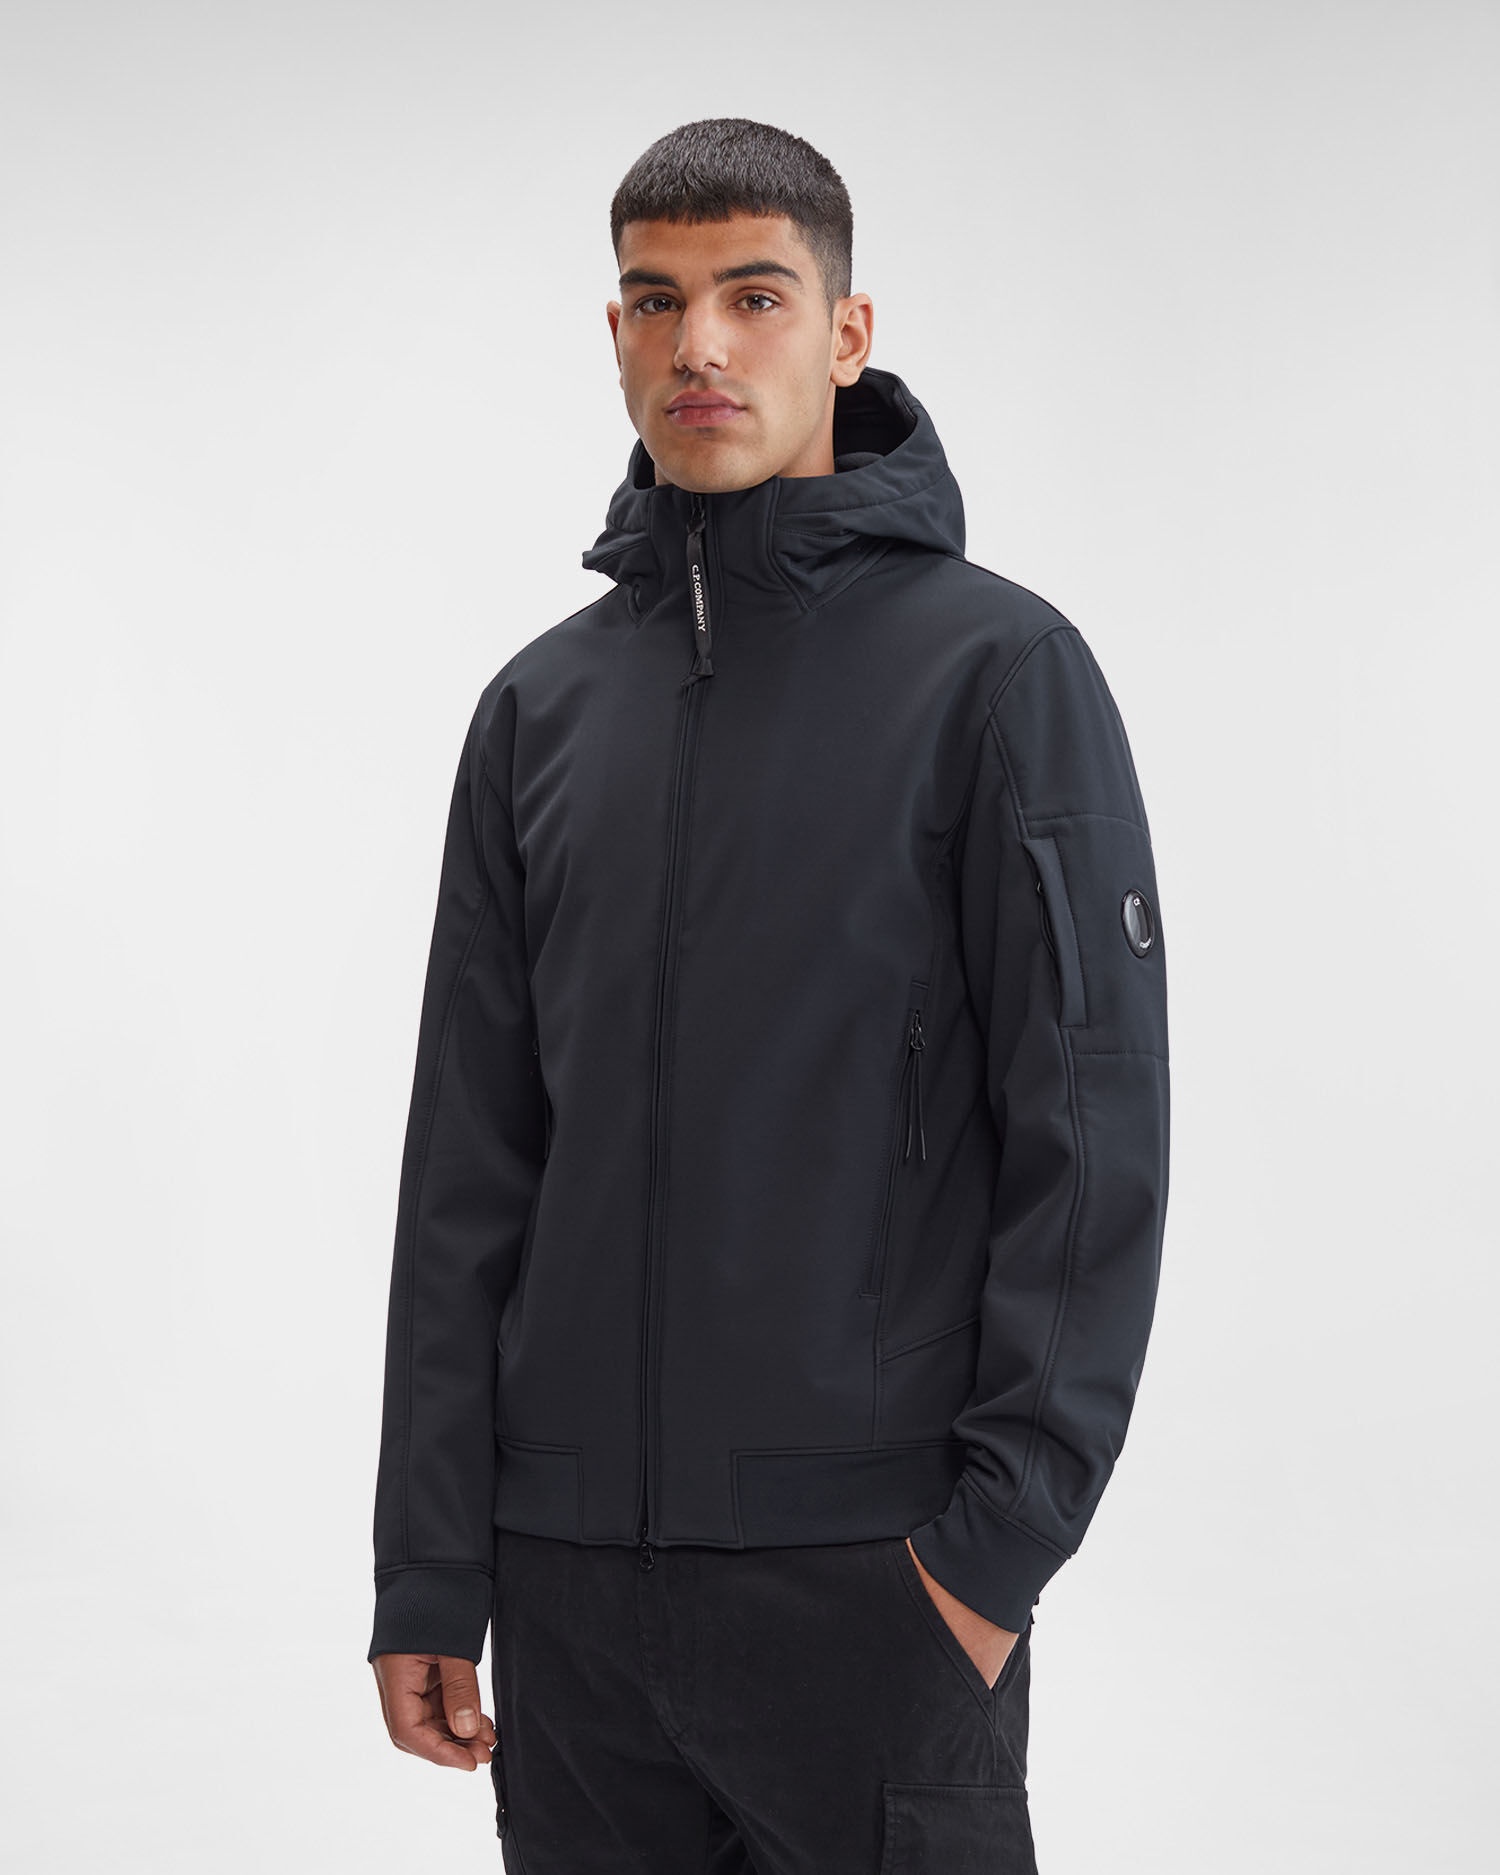 C.P. Shell-R Hooded Jacket - 2